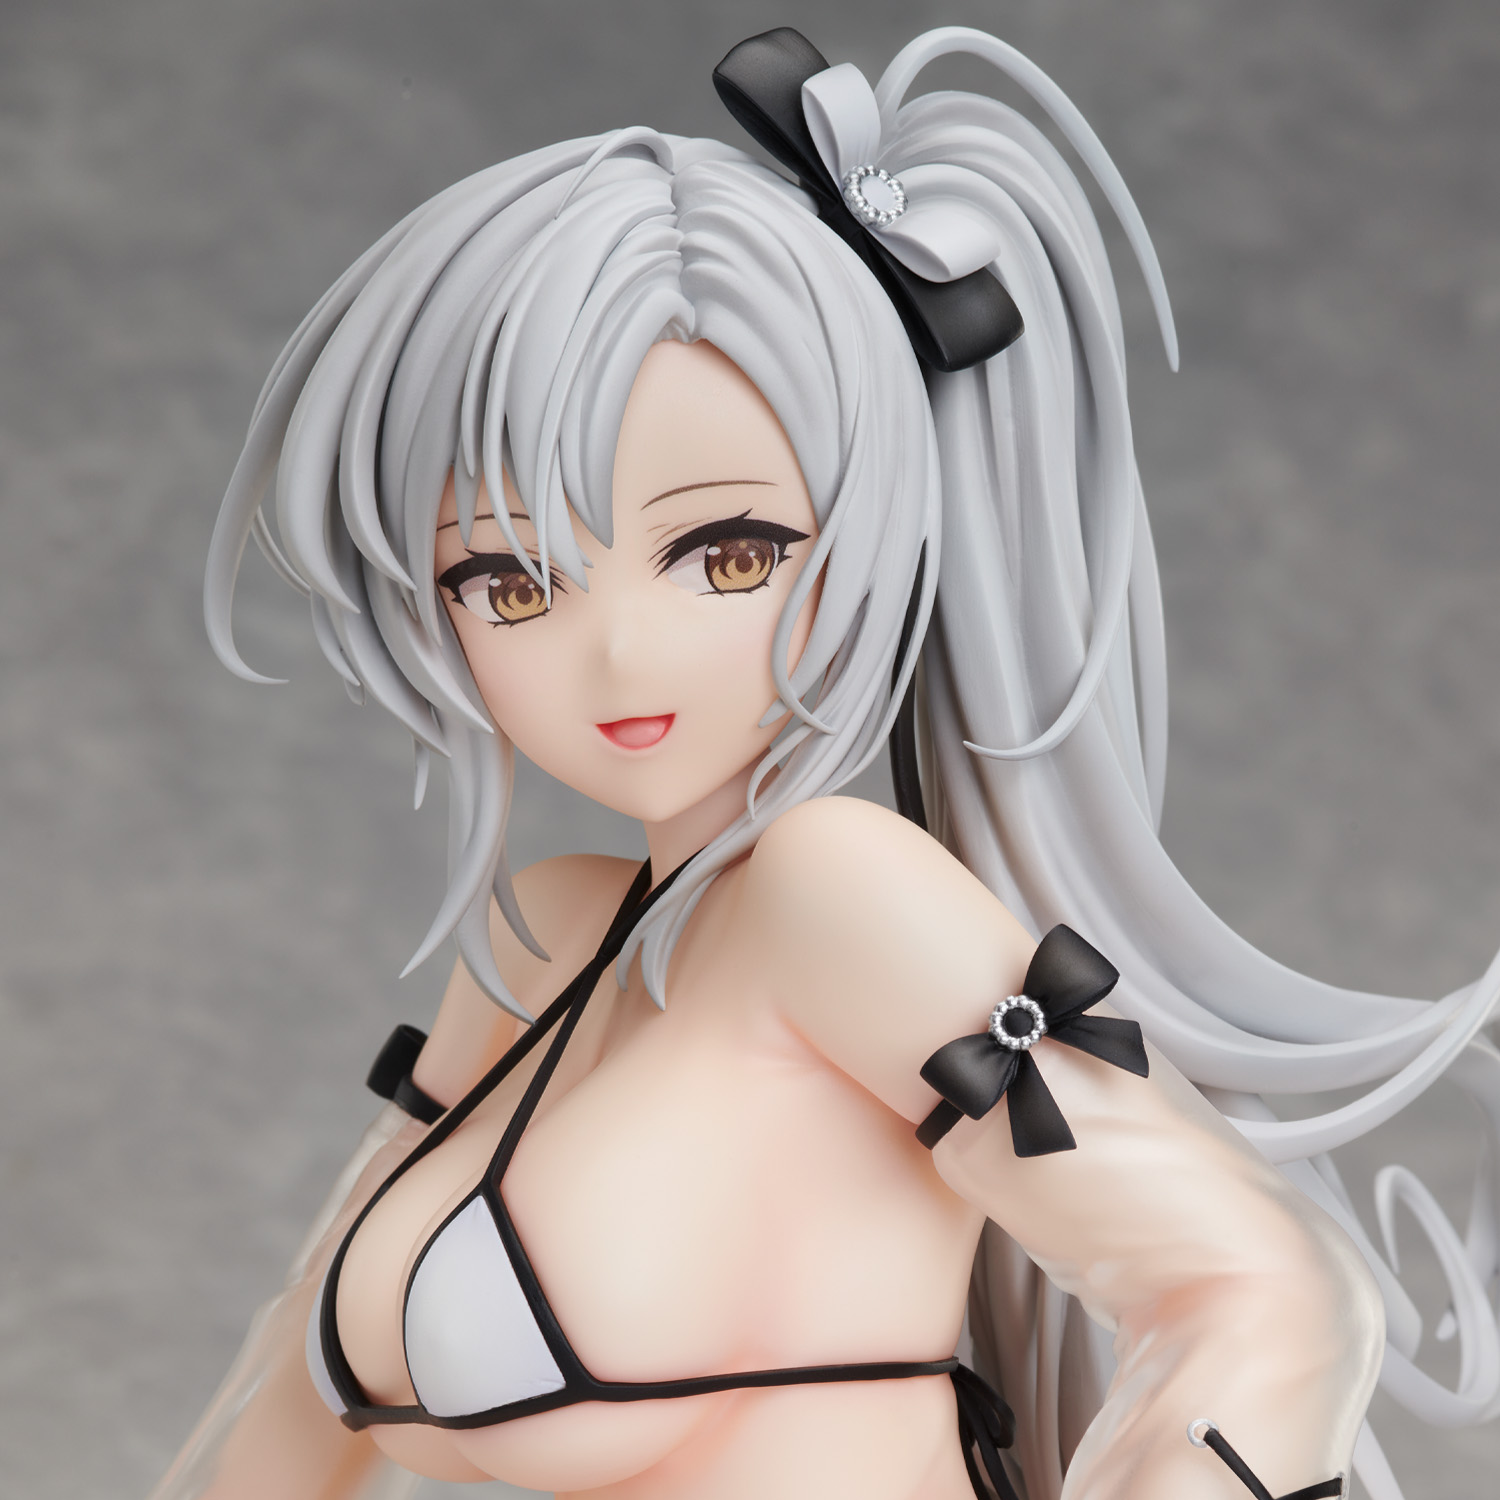 azur-lane-drake-14-scale-figure-the-golden-hinds-respite-ver image count 6